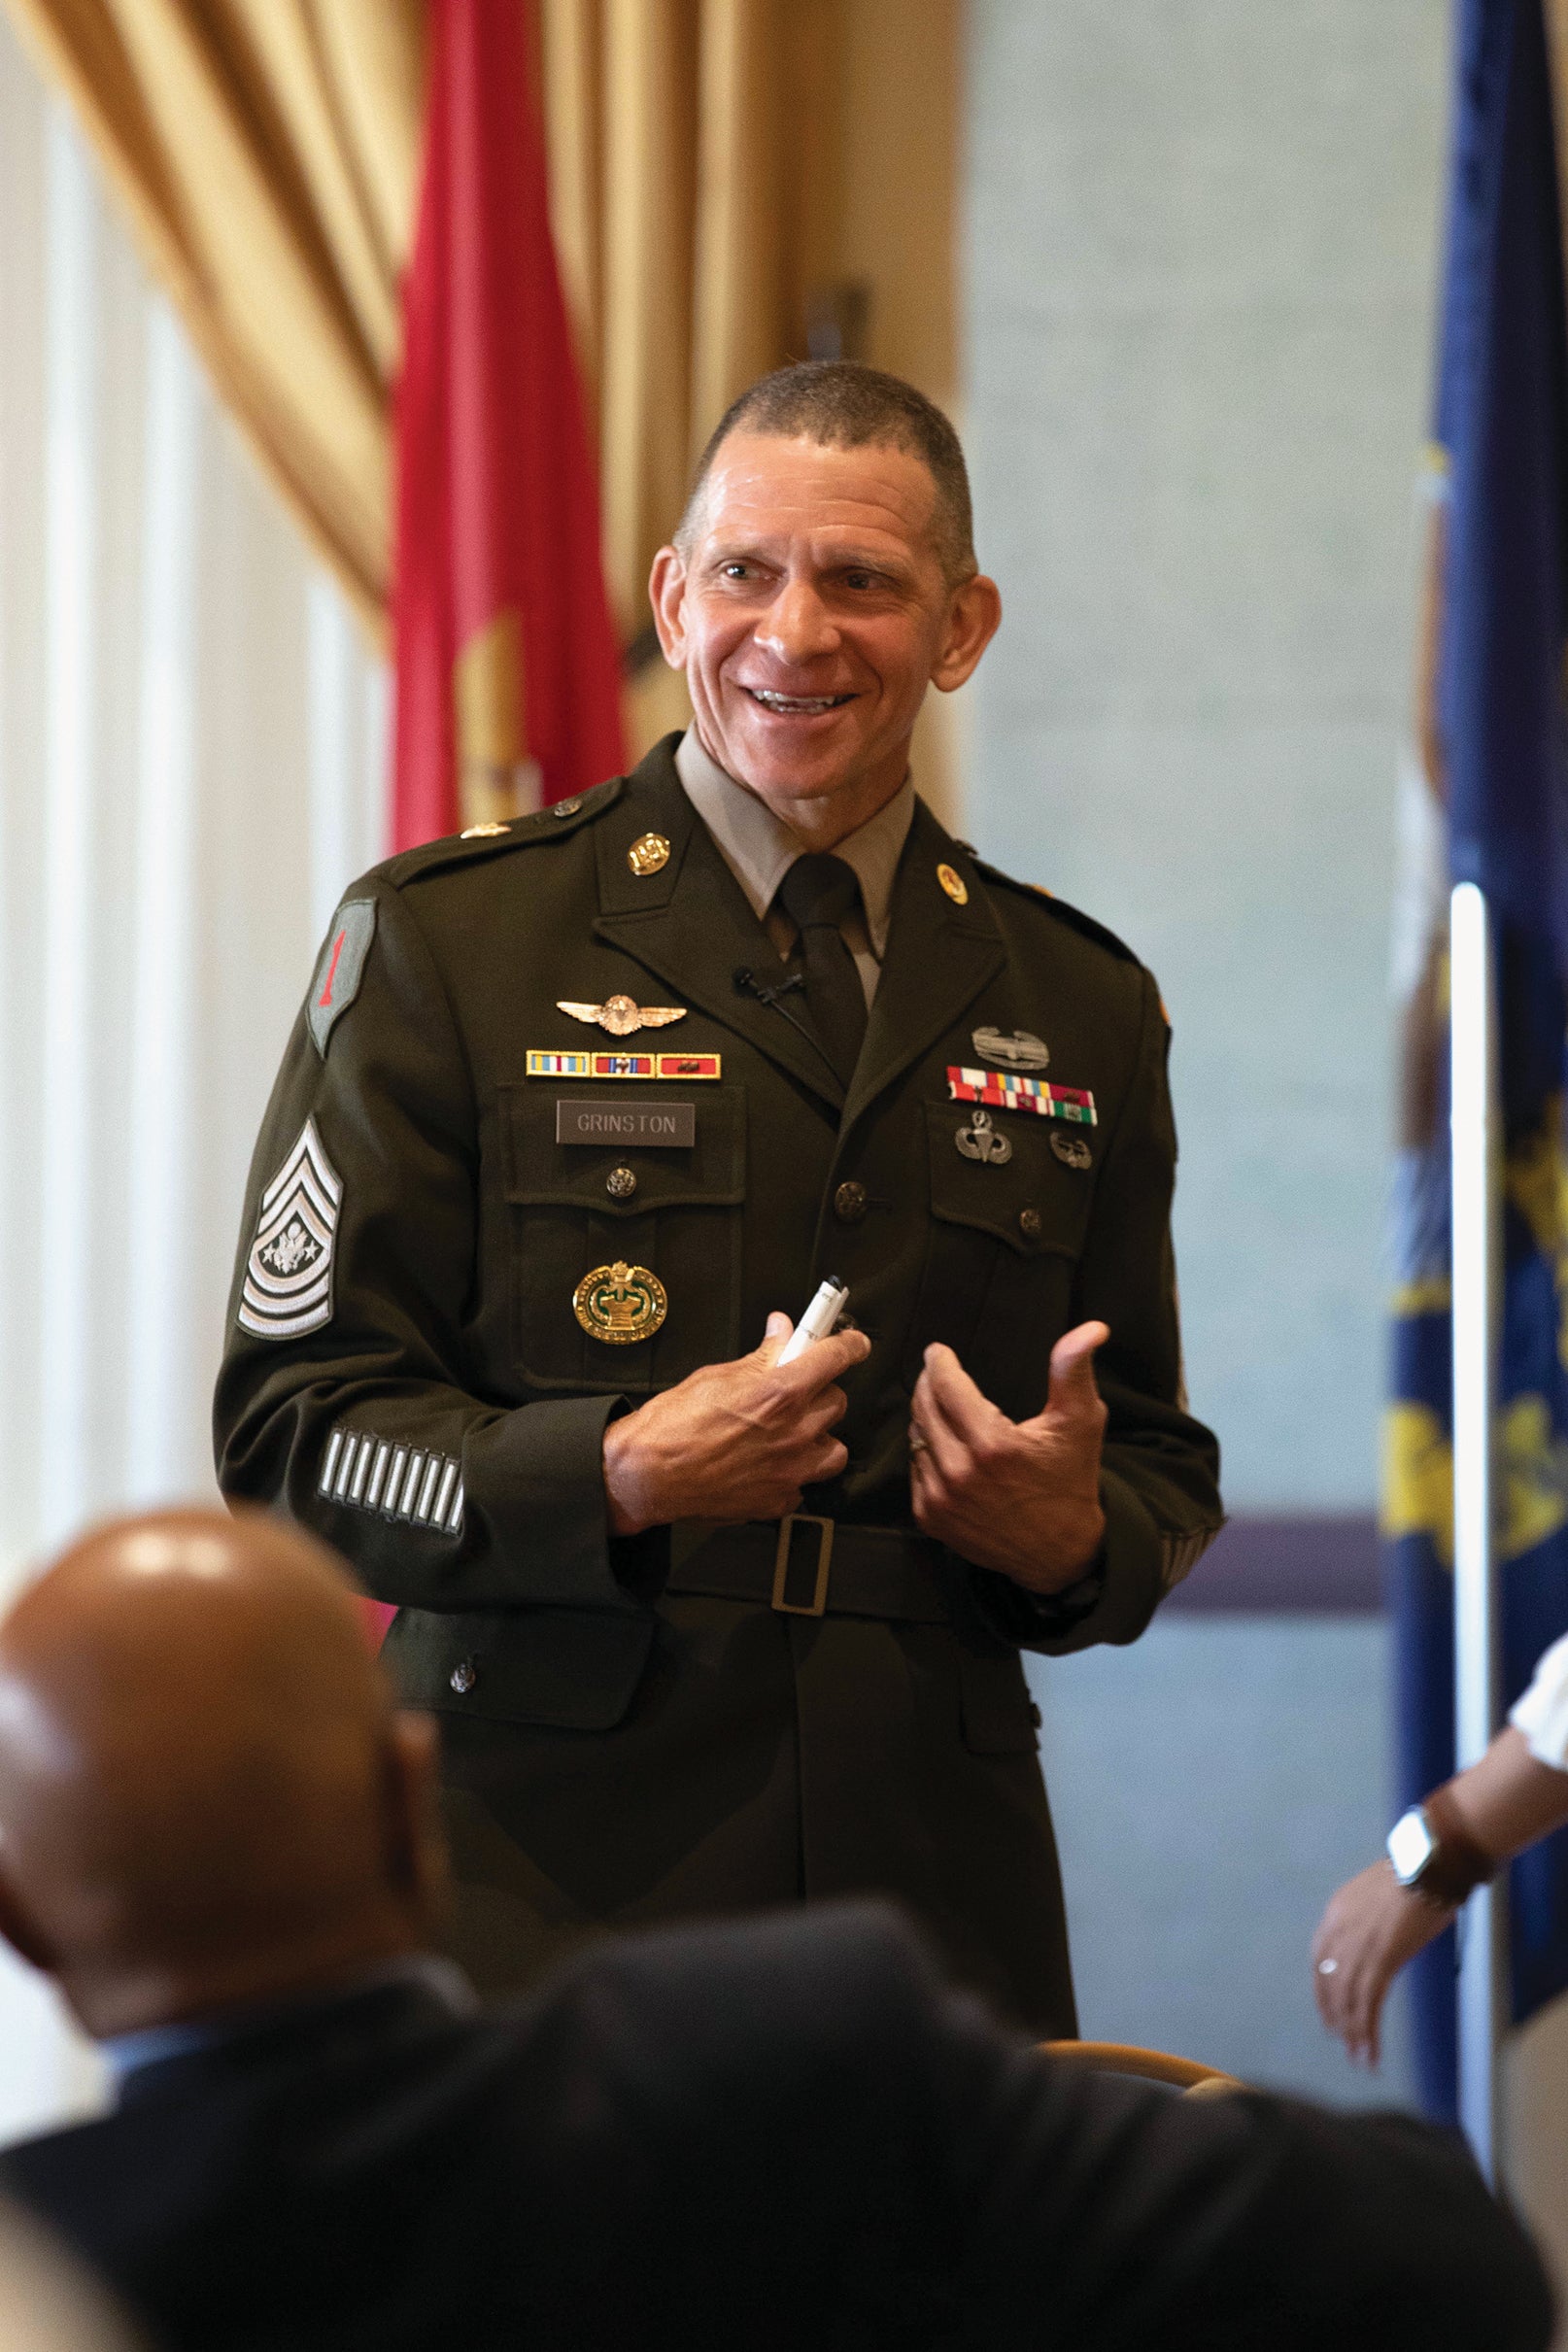 Sgt. Maj. of the Army Michael Grinston speaks at an event in San Francisco. (Credit: opposite: U.S. Army Reserve/Spc. Kenneth Rodriguez)